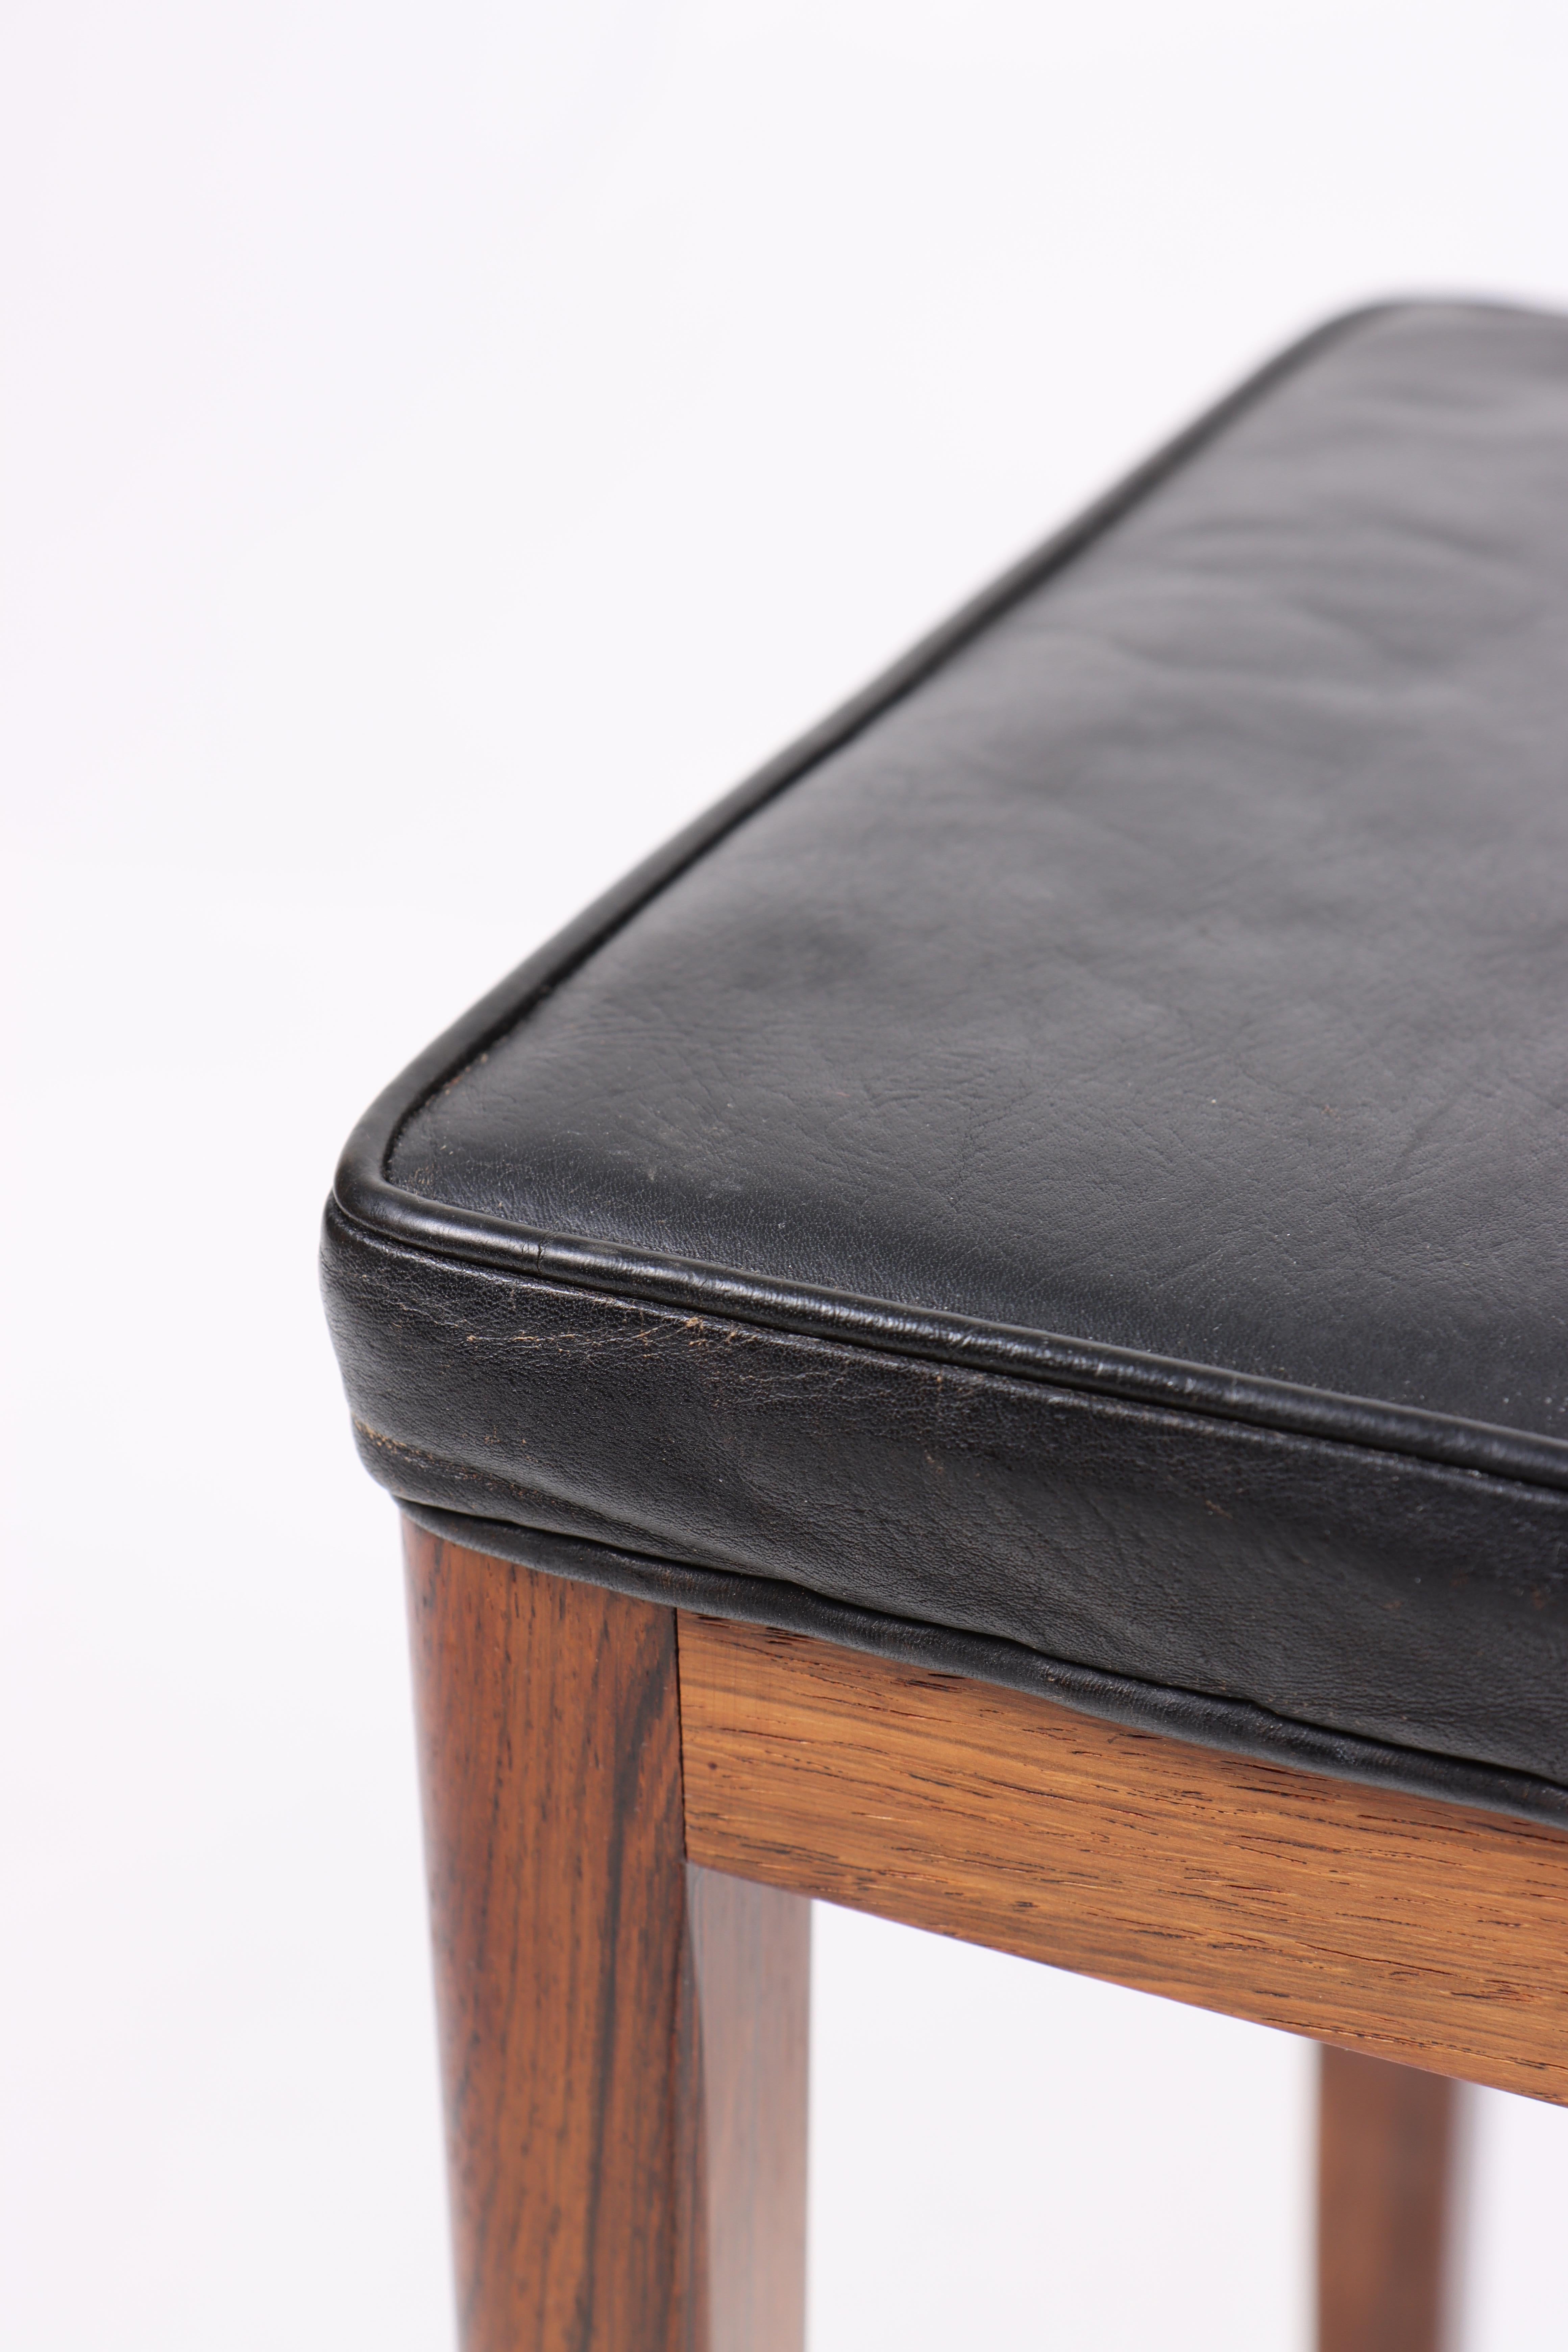 Scandinavian Modern Mid-Century Stool in Patinated Leather, Made in Denmark, 1960s For Sale